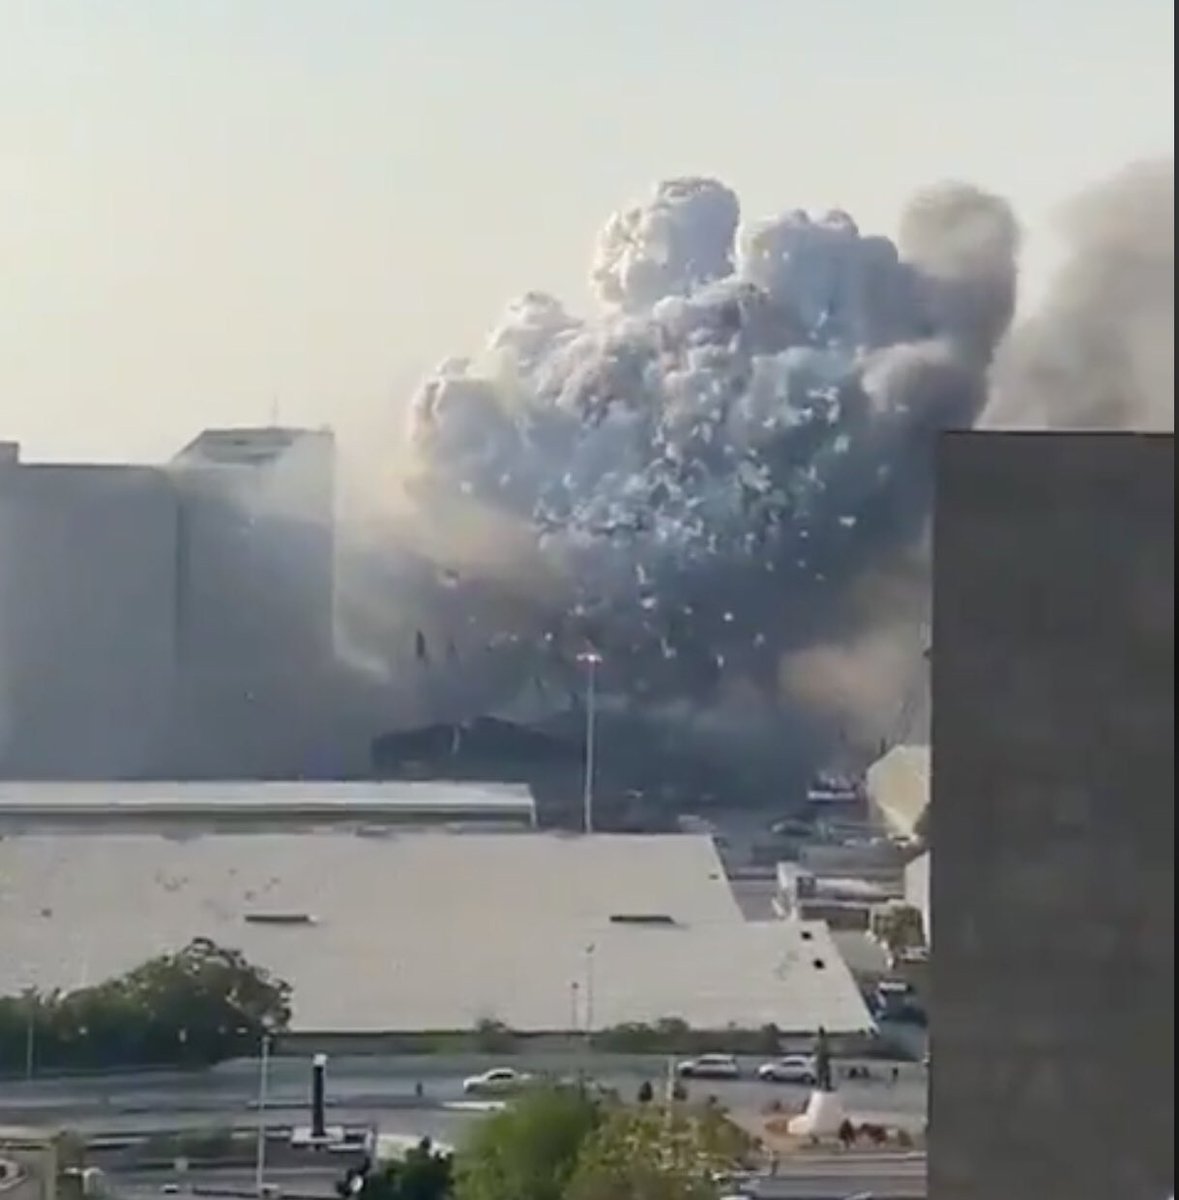 looking at some other angles it is clear that the silos were destroyed by the explosion and the origin is the warehouse looking thing in front of itthere’s also some weird shit in the air shortly before the explosion